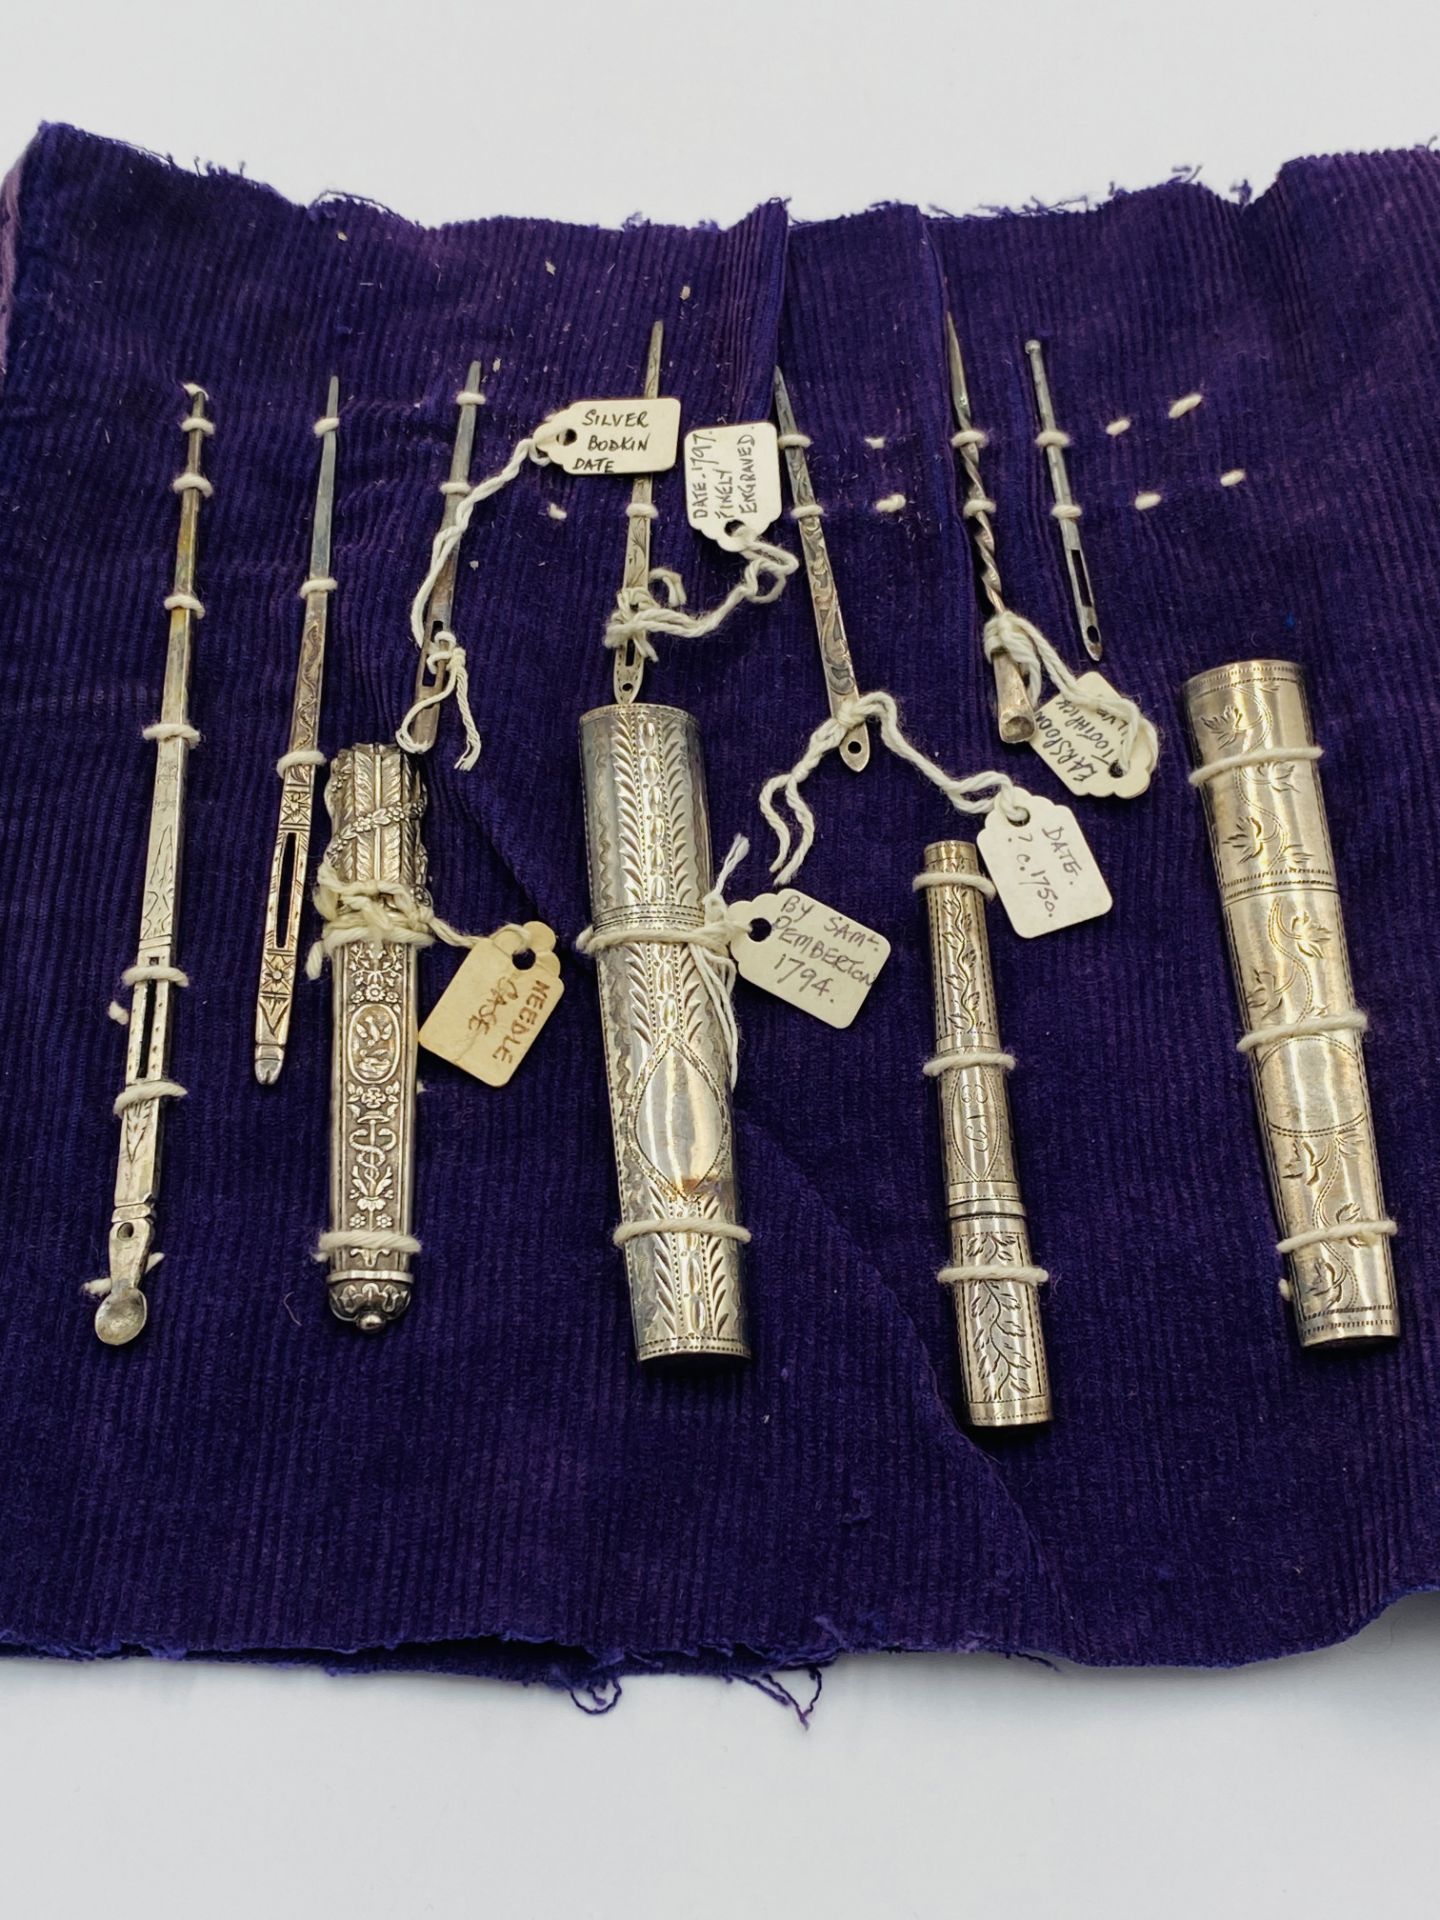 A collection of silver needle cases and bodkins